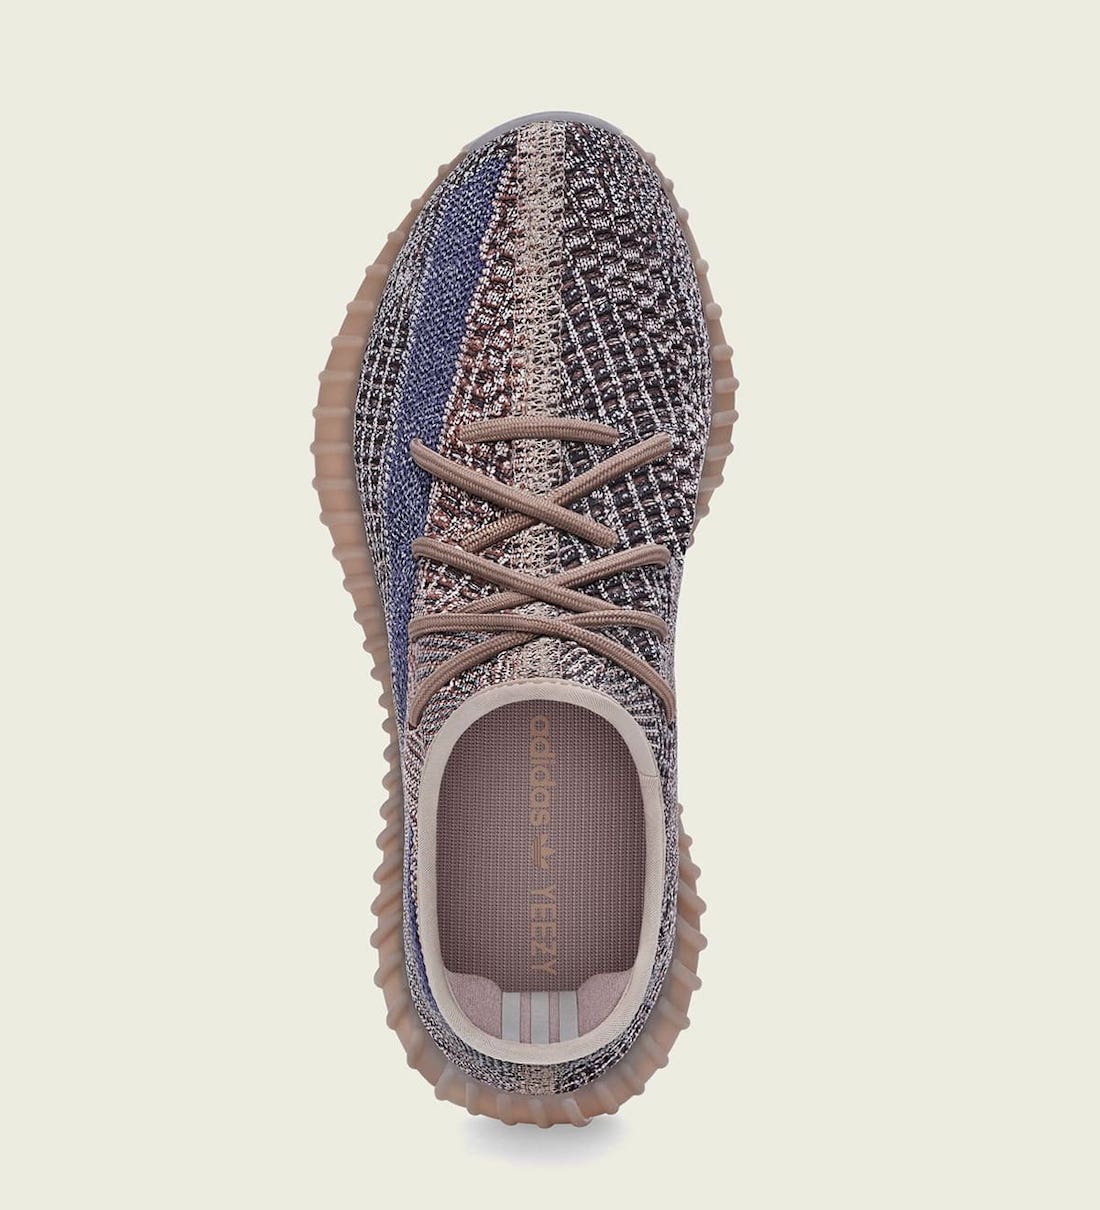 adidas Yeezy Boost 350 V2 Fade H02795 Release Details